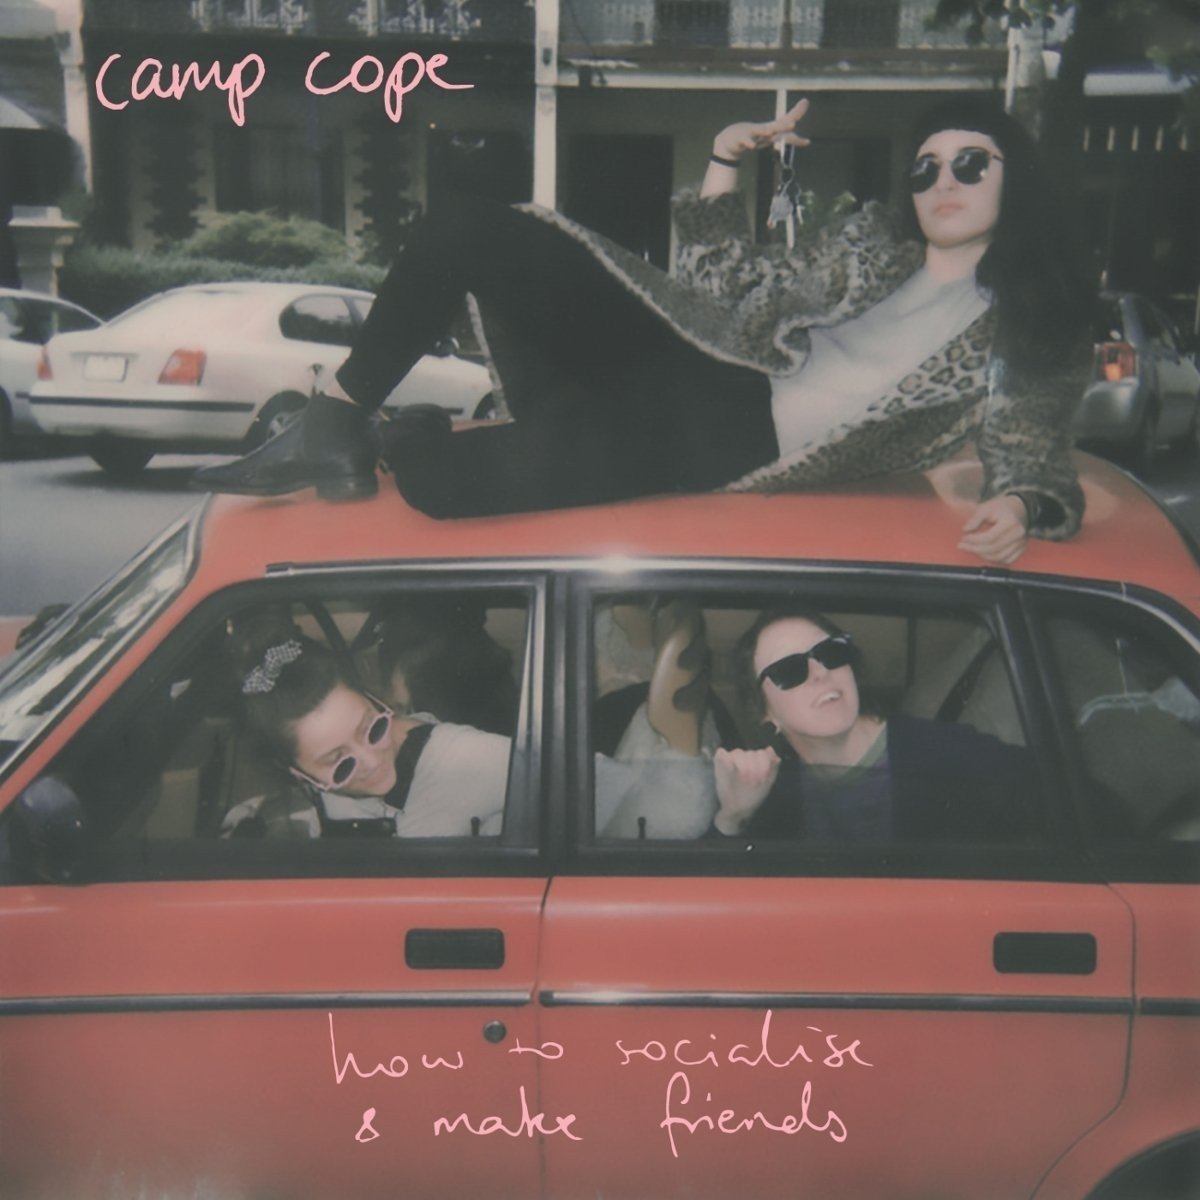 CD Shop - CAMP COPE HOW TO SOCIALISE & MAKE FRIENDS